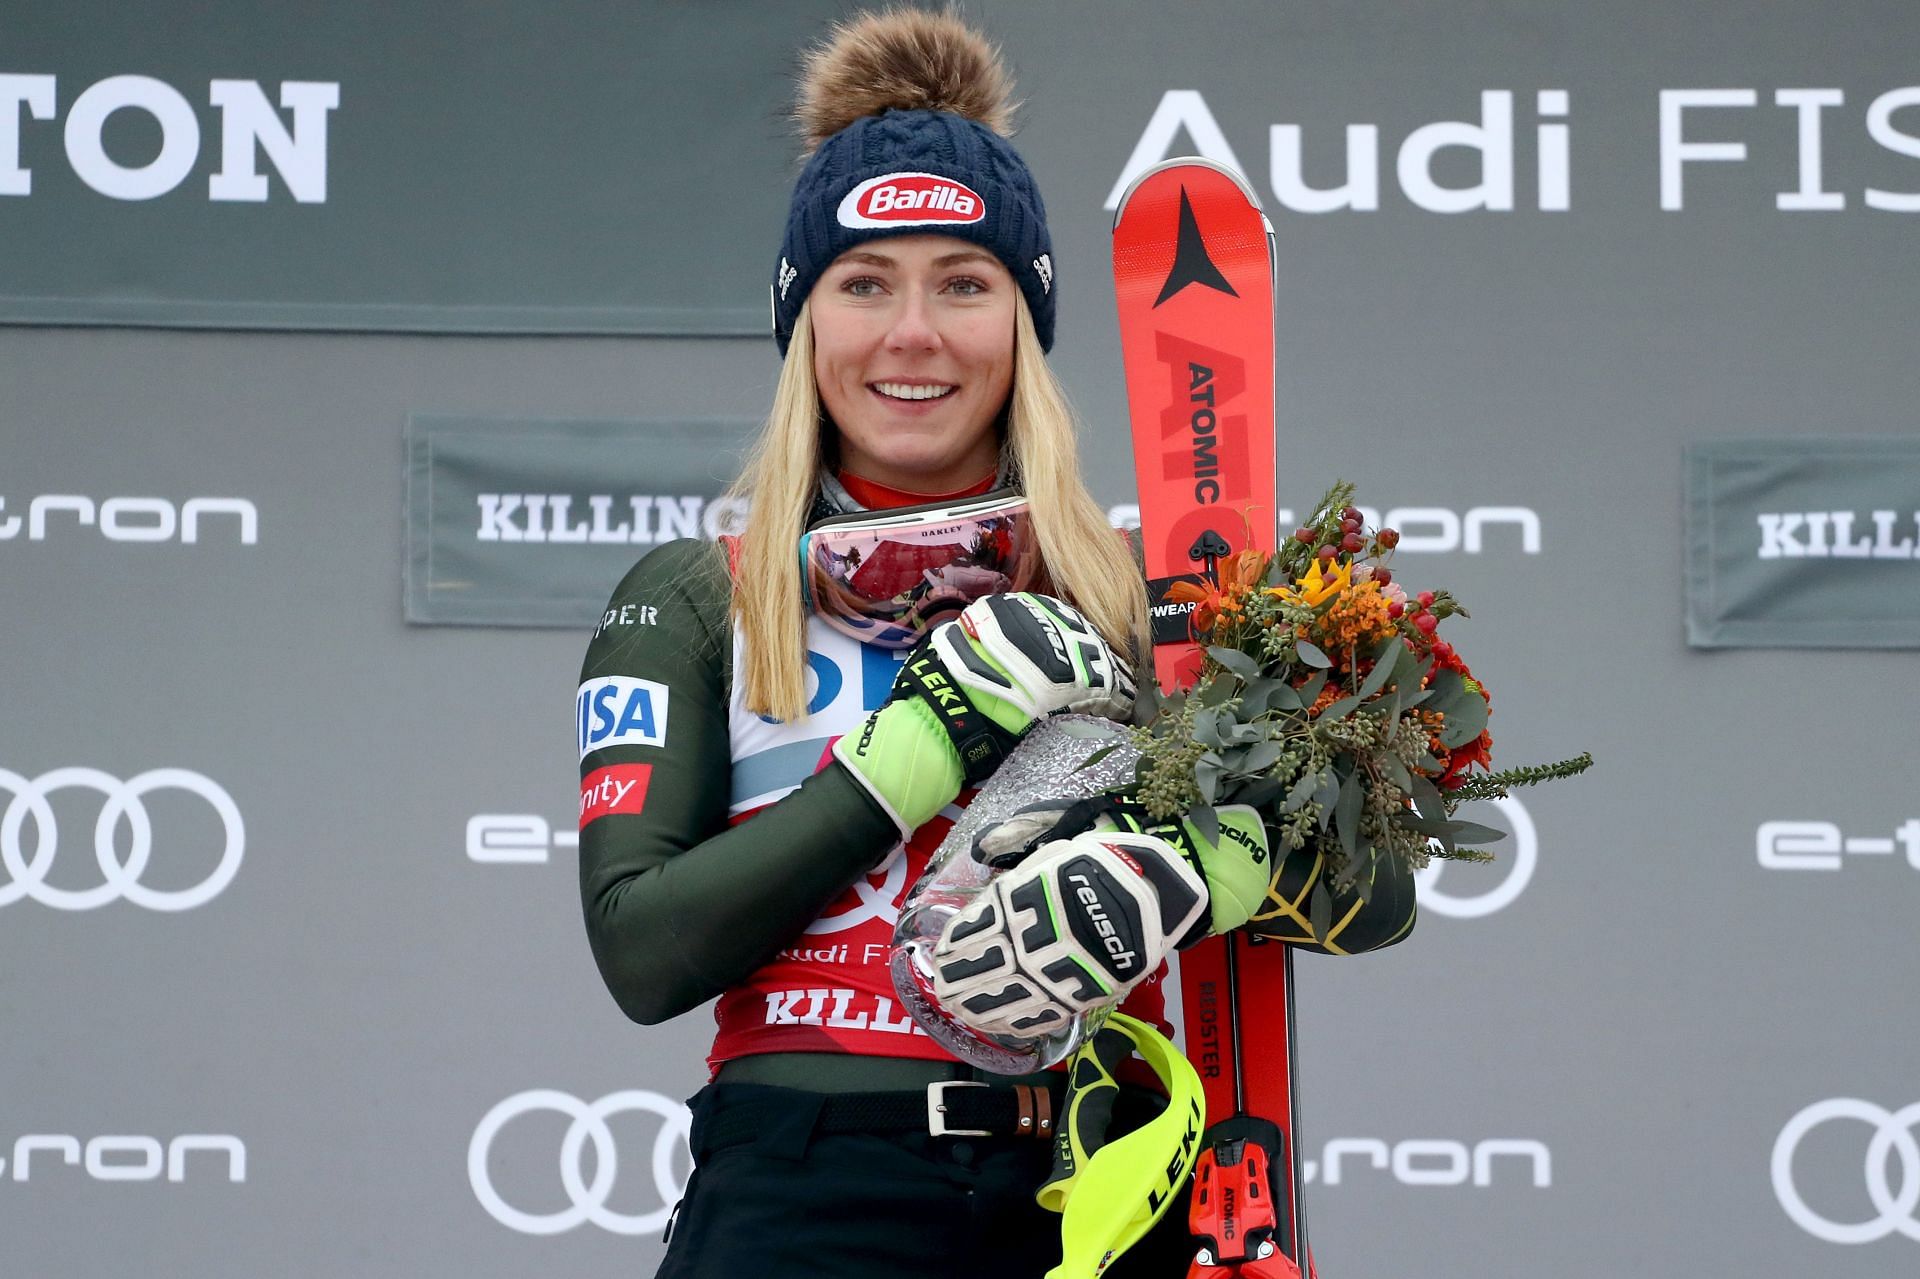 Mikaela Shiffrin of the United States stands on the podium during the National Anthem after winning the Women&#039;s Slalom during the Audi FIS Ski World Cup - Killington Cup on December 01, 2019, in Killington, Vermont. (Photo by Tom Pennington/Getty Images)